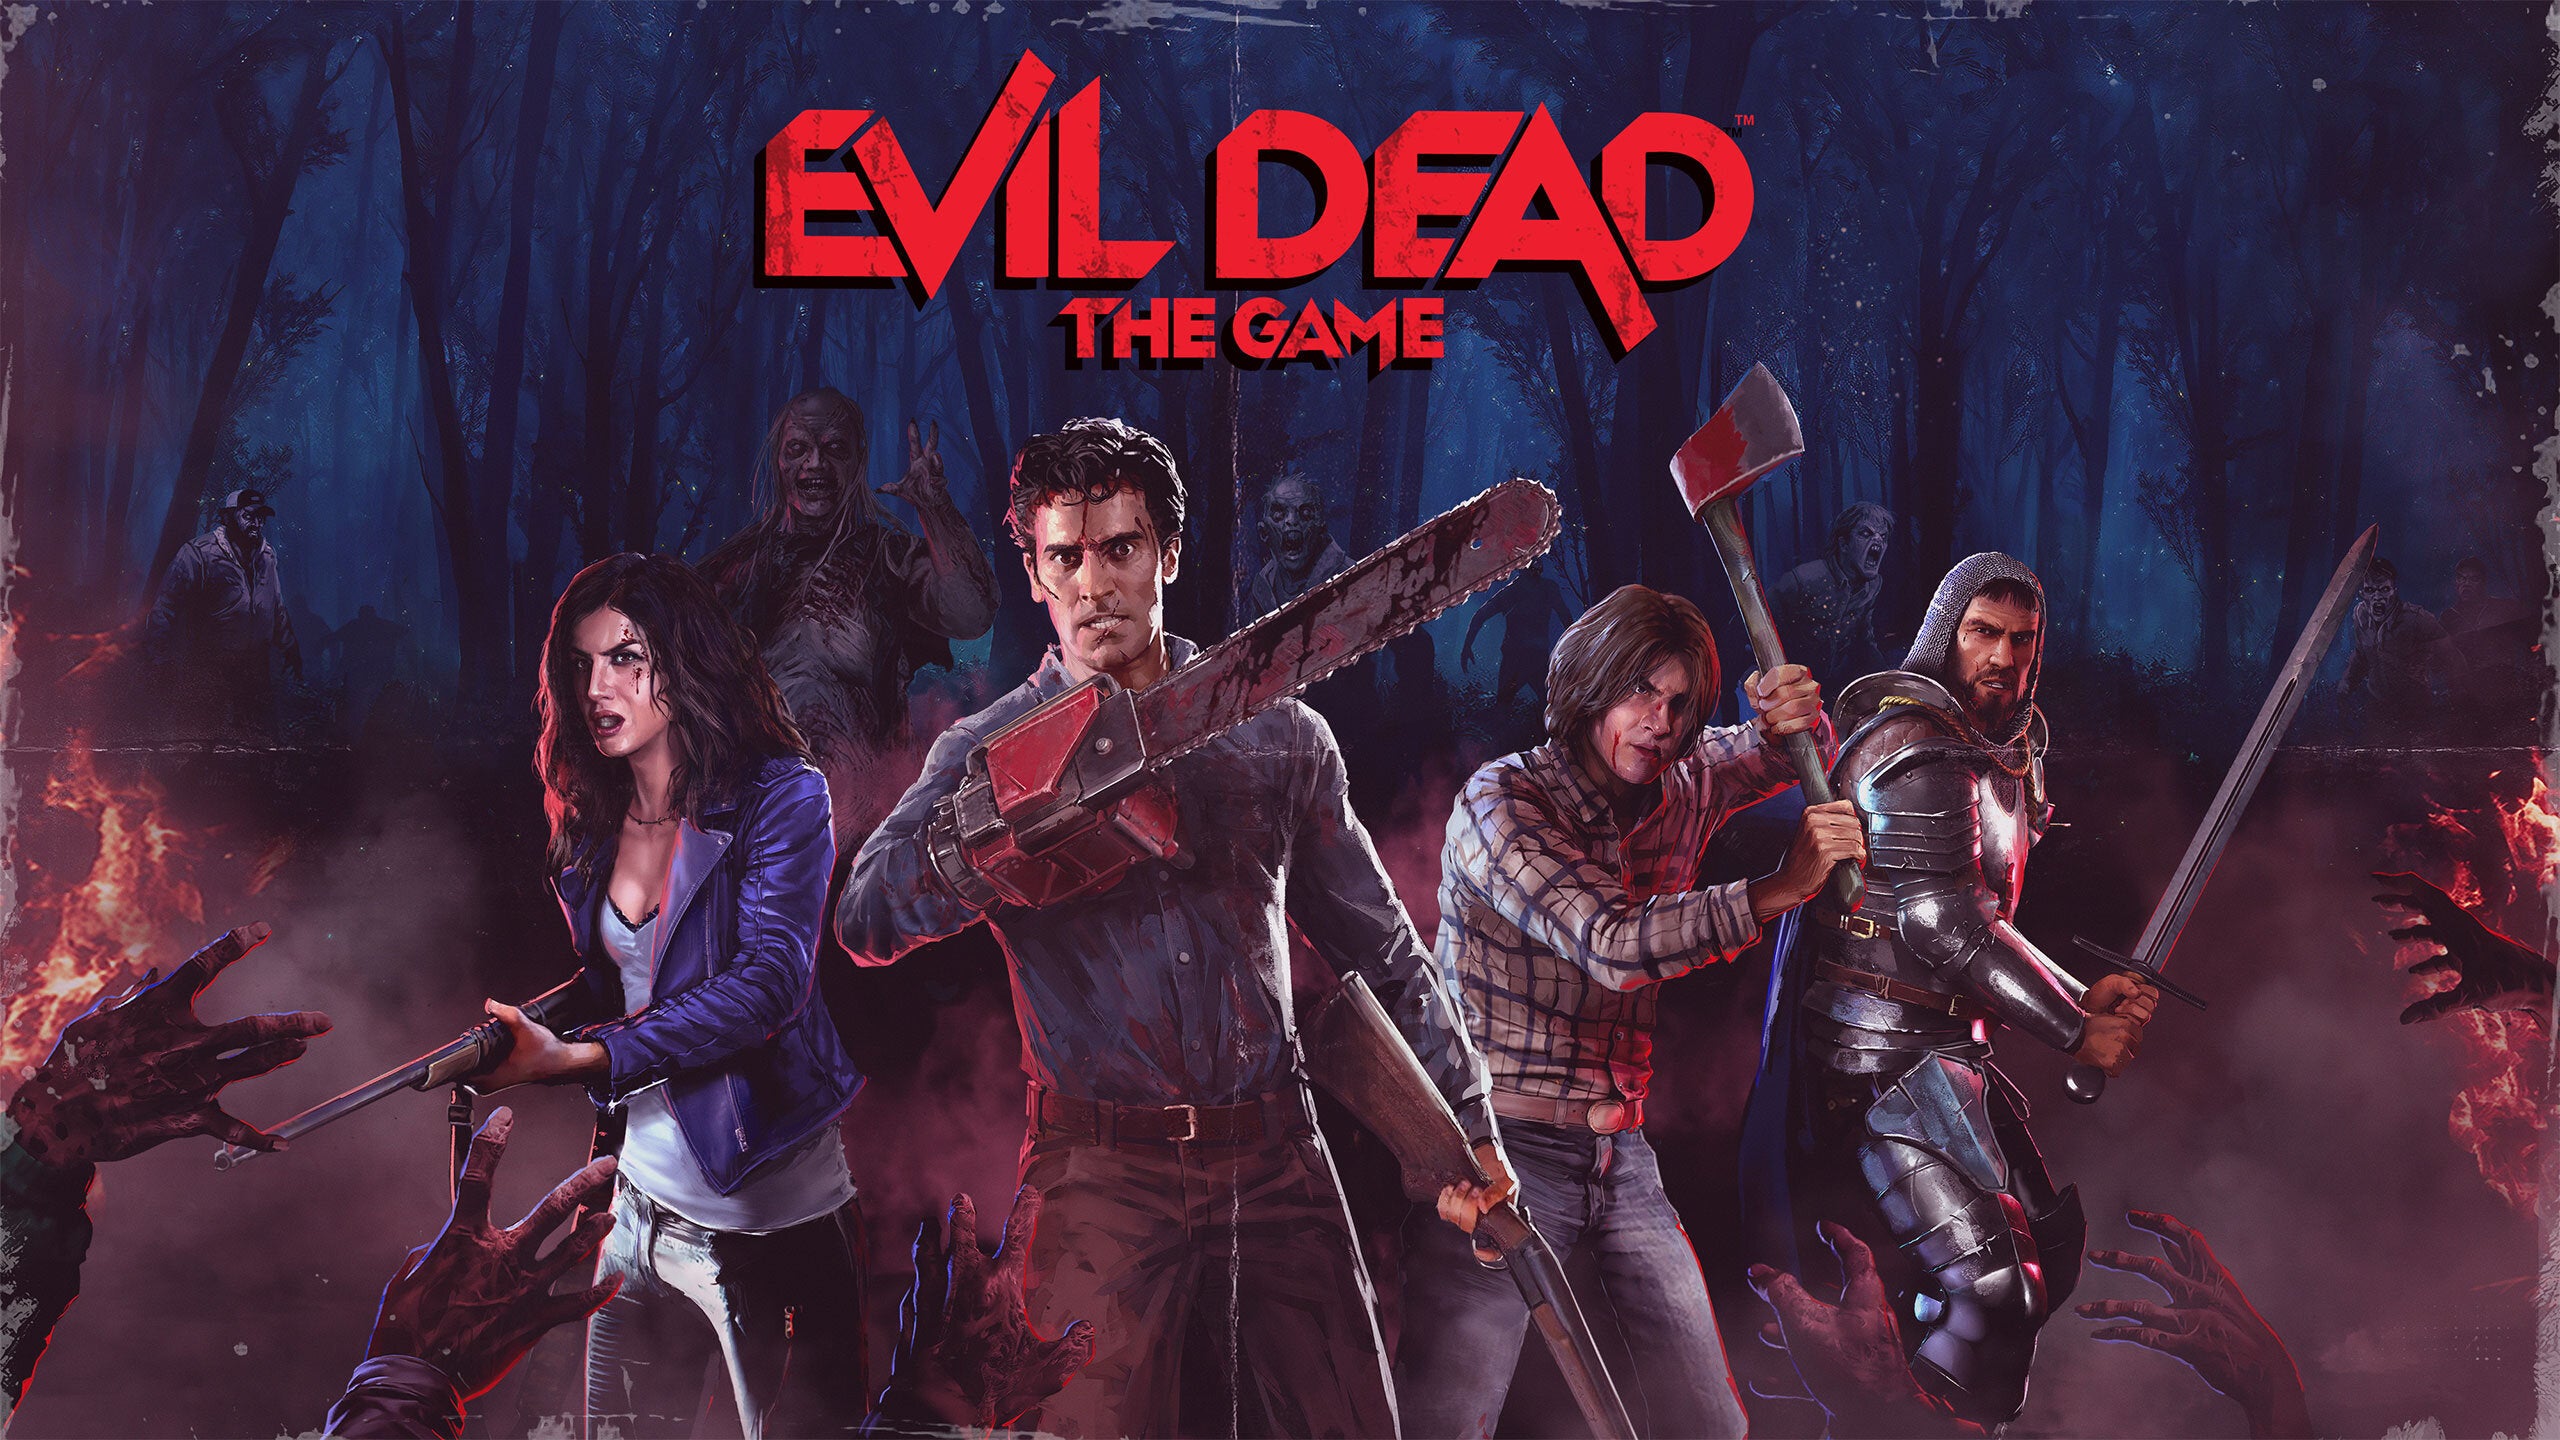 Evil Dead: The Game Review - A groovy gore-fest, but something is missing